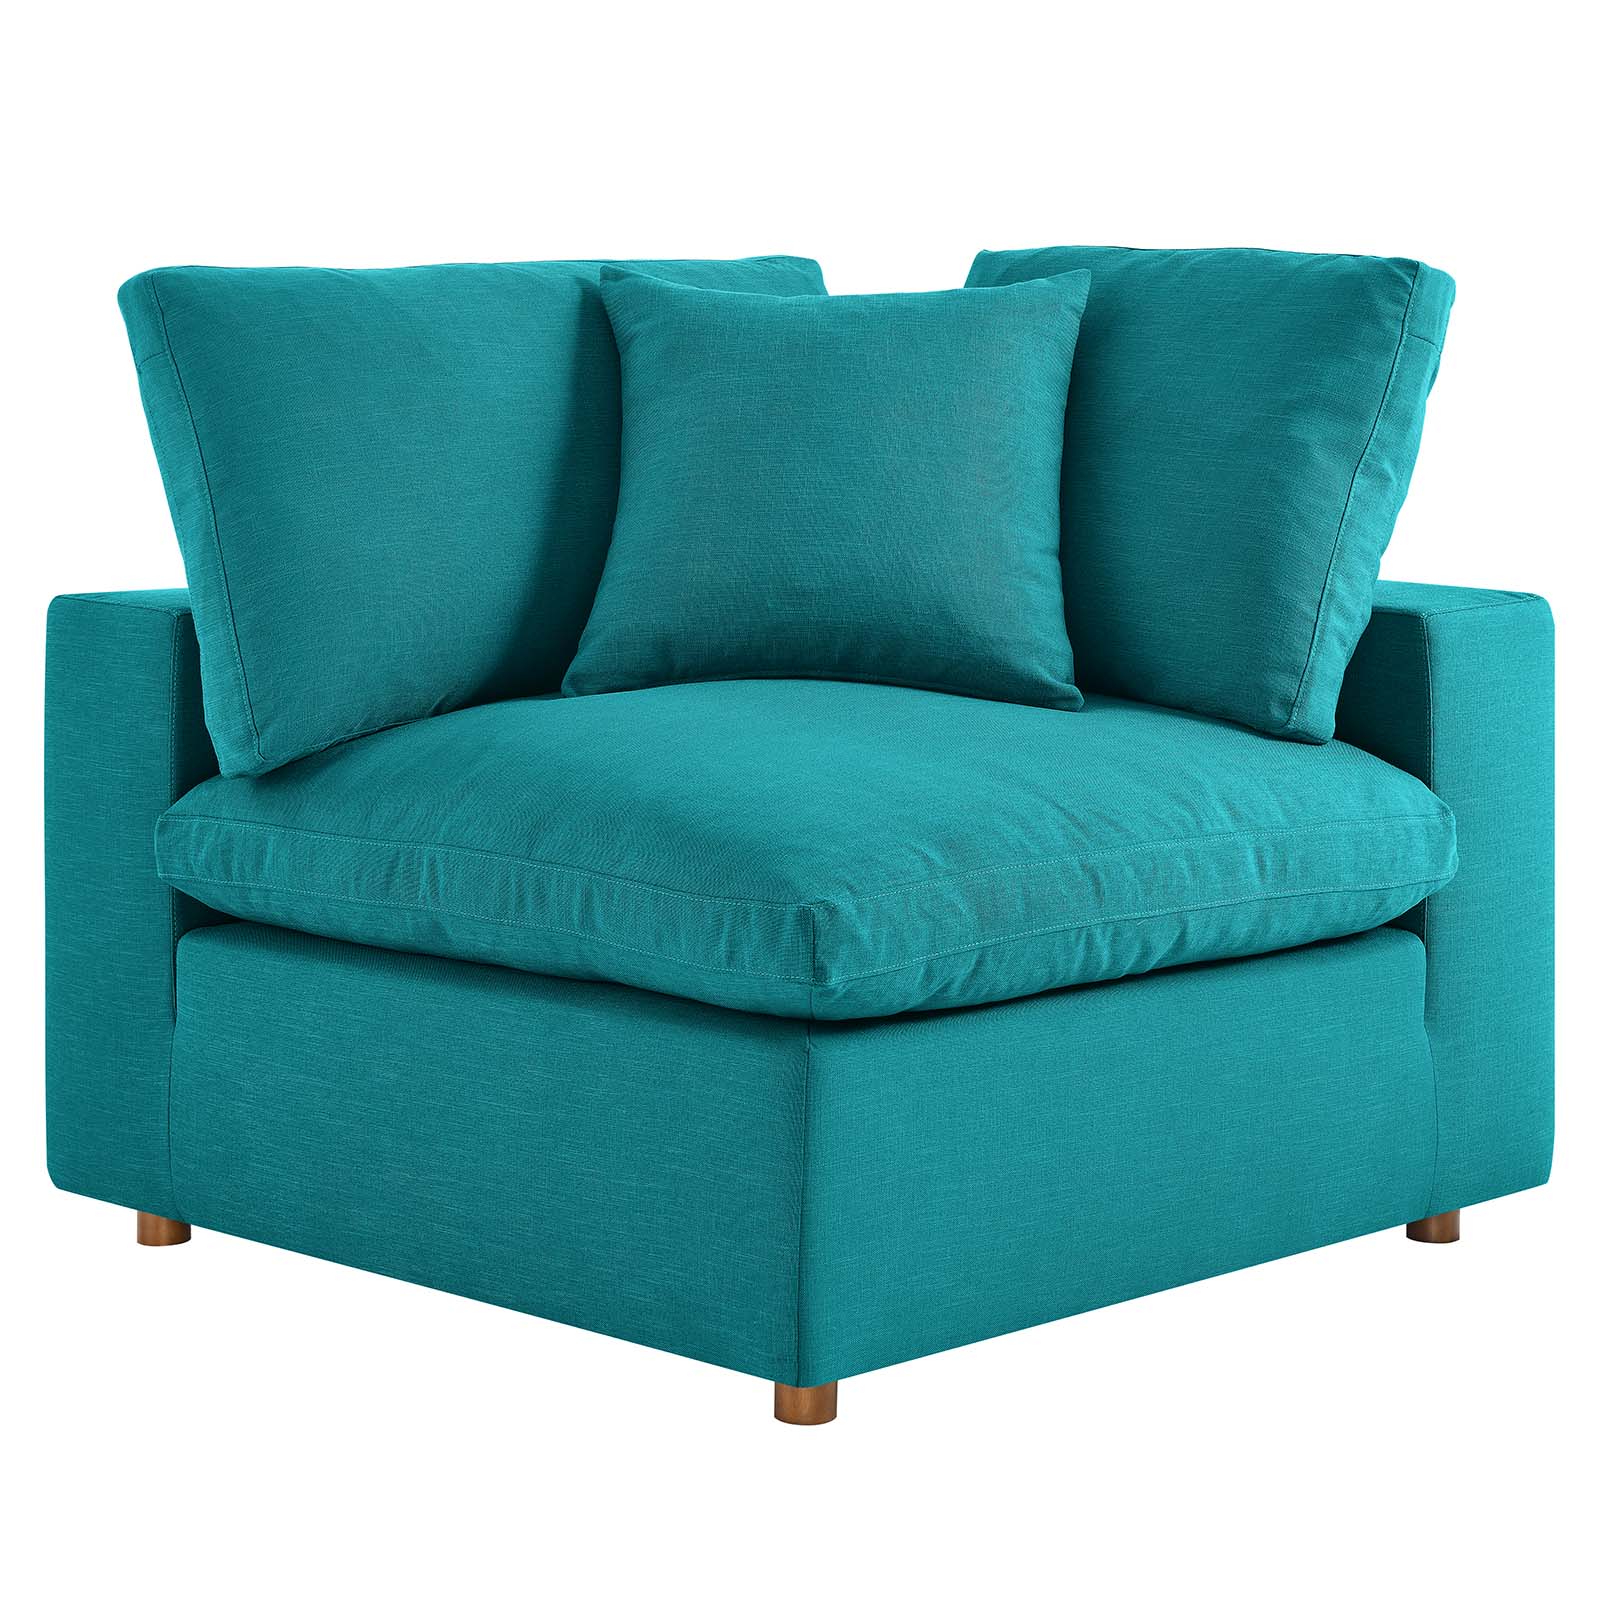 Modway Commix 4-Piece Fabric Down Filled Sectional Sofa Set in Teal - image 3 of 10